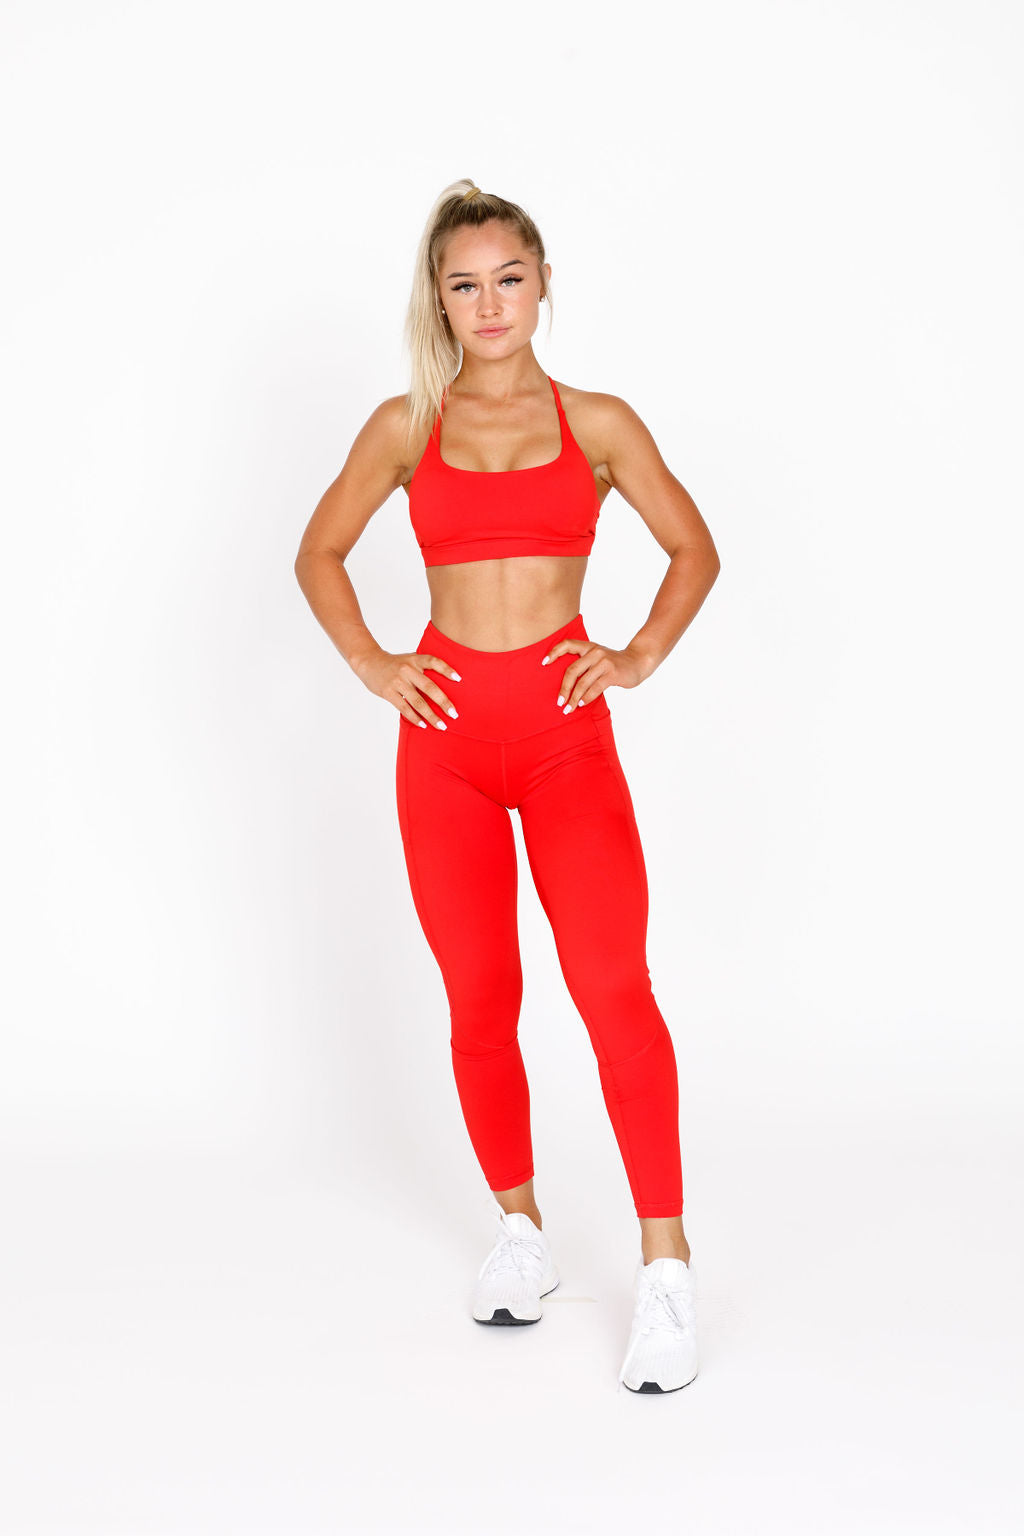 Feed Me Fight Me Army Athletic Leggings for Women